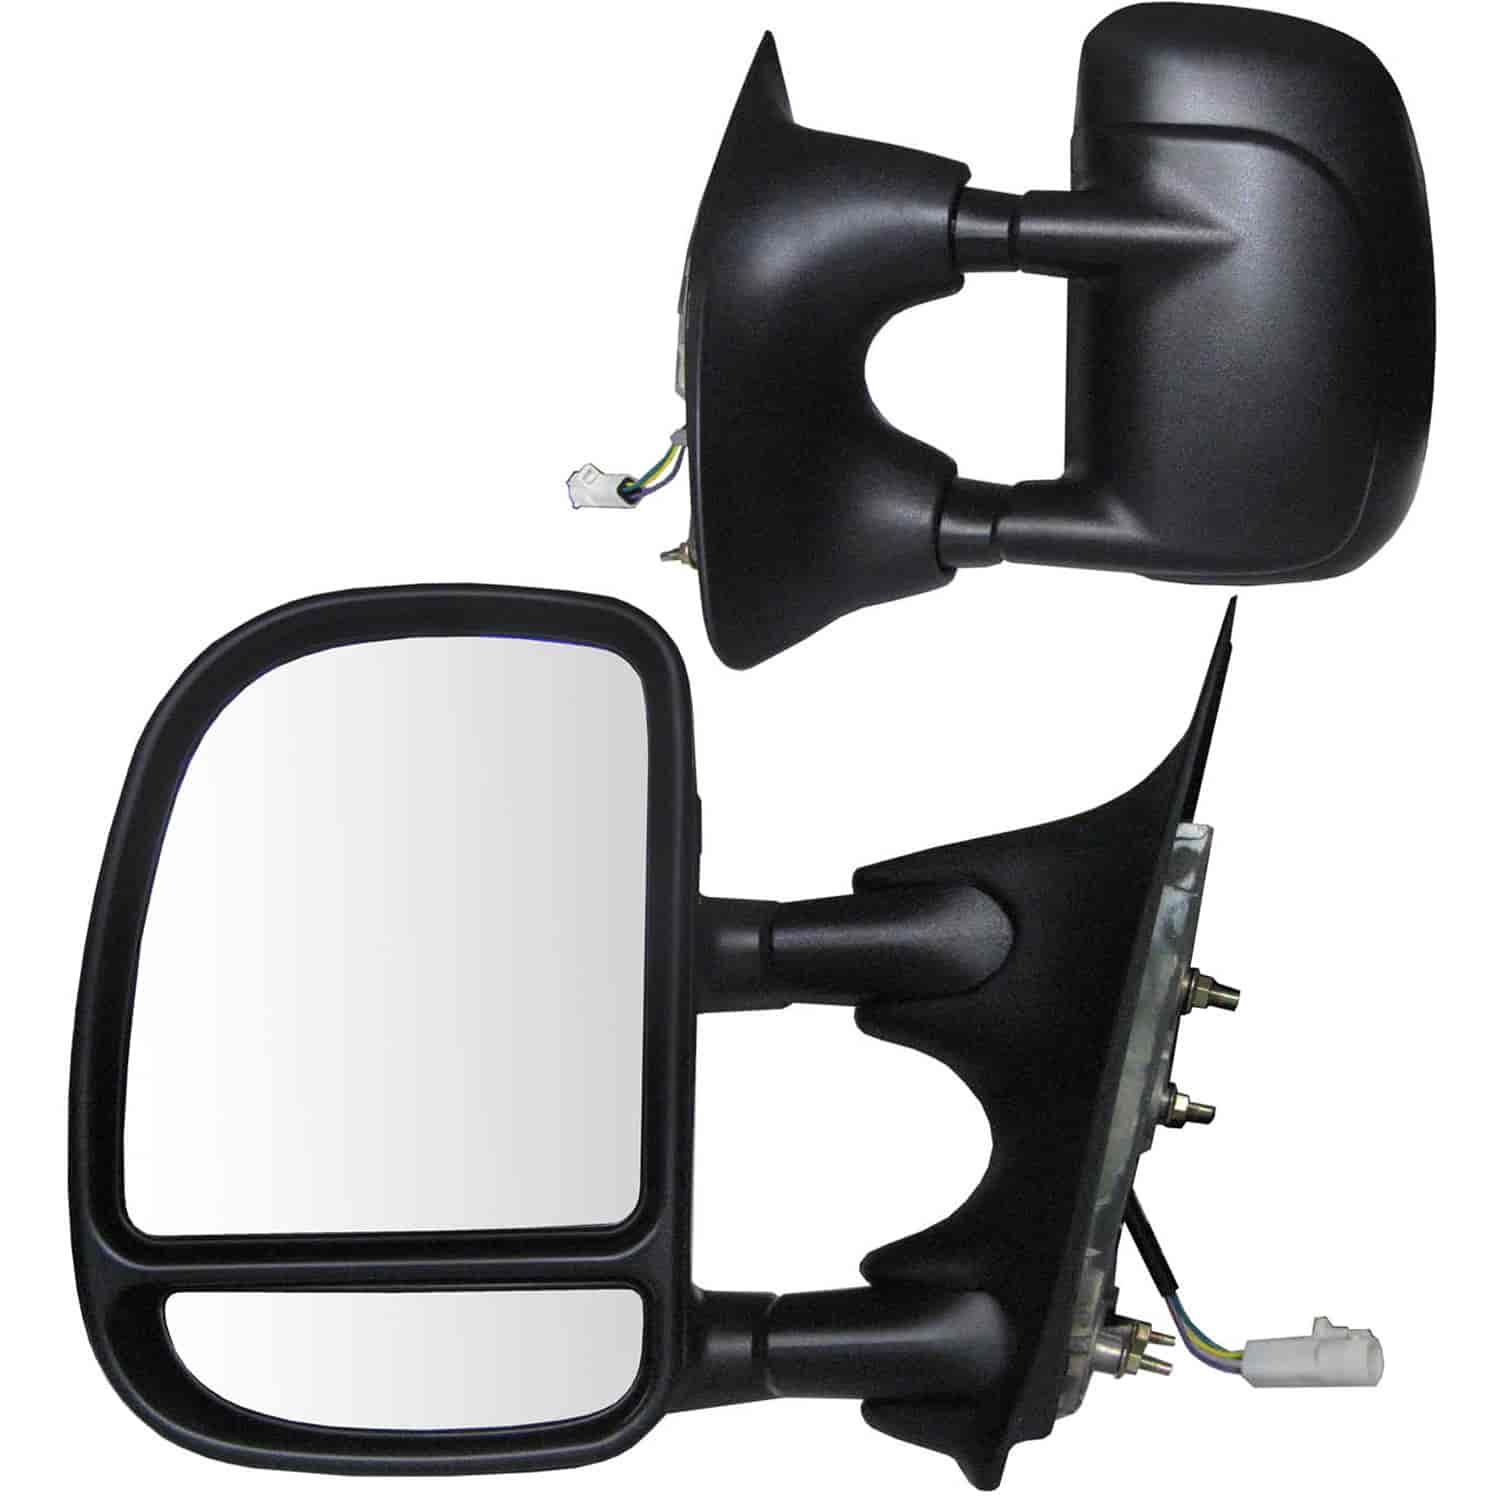 OEM Style Replacement Mirror Fits 1999 to 2000 Ford F-Series Super Duty